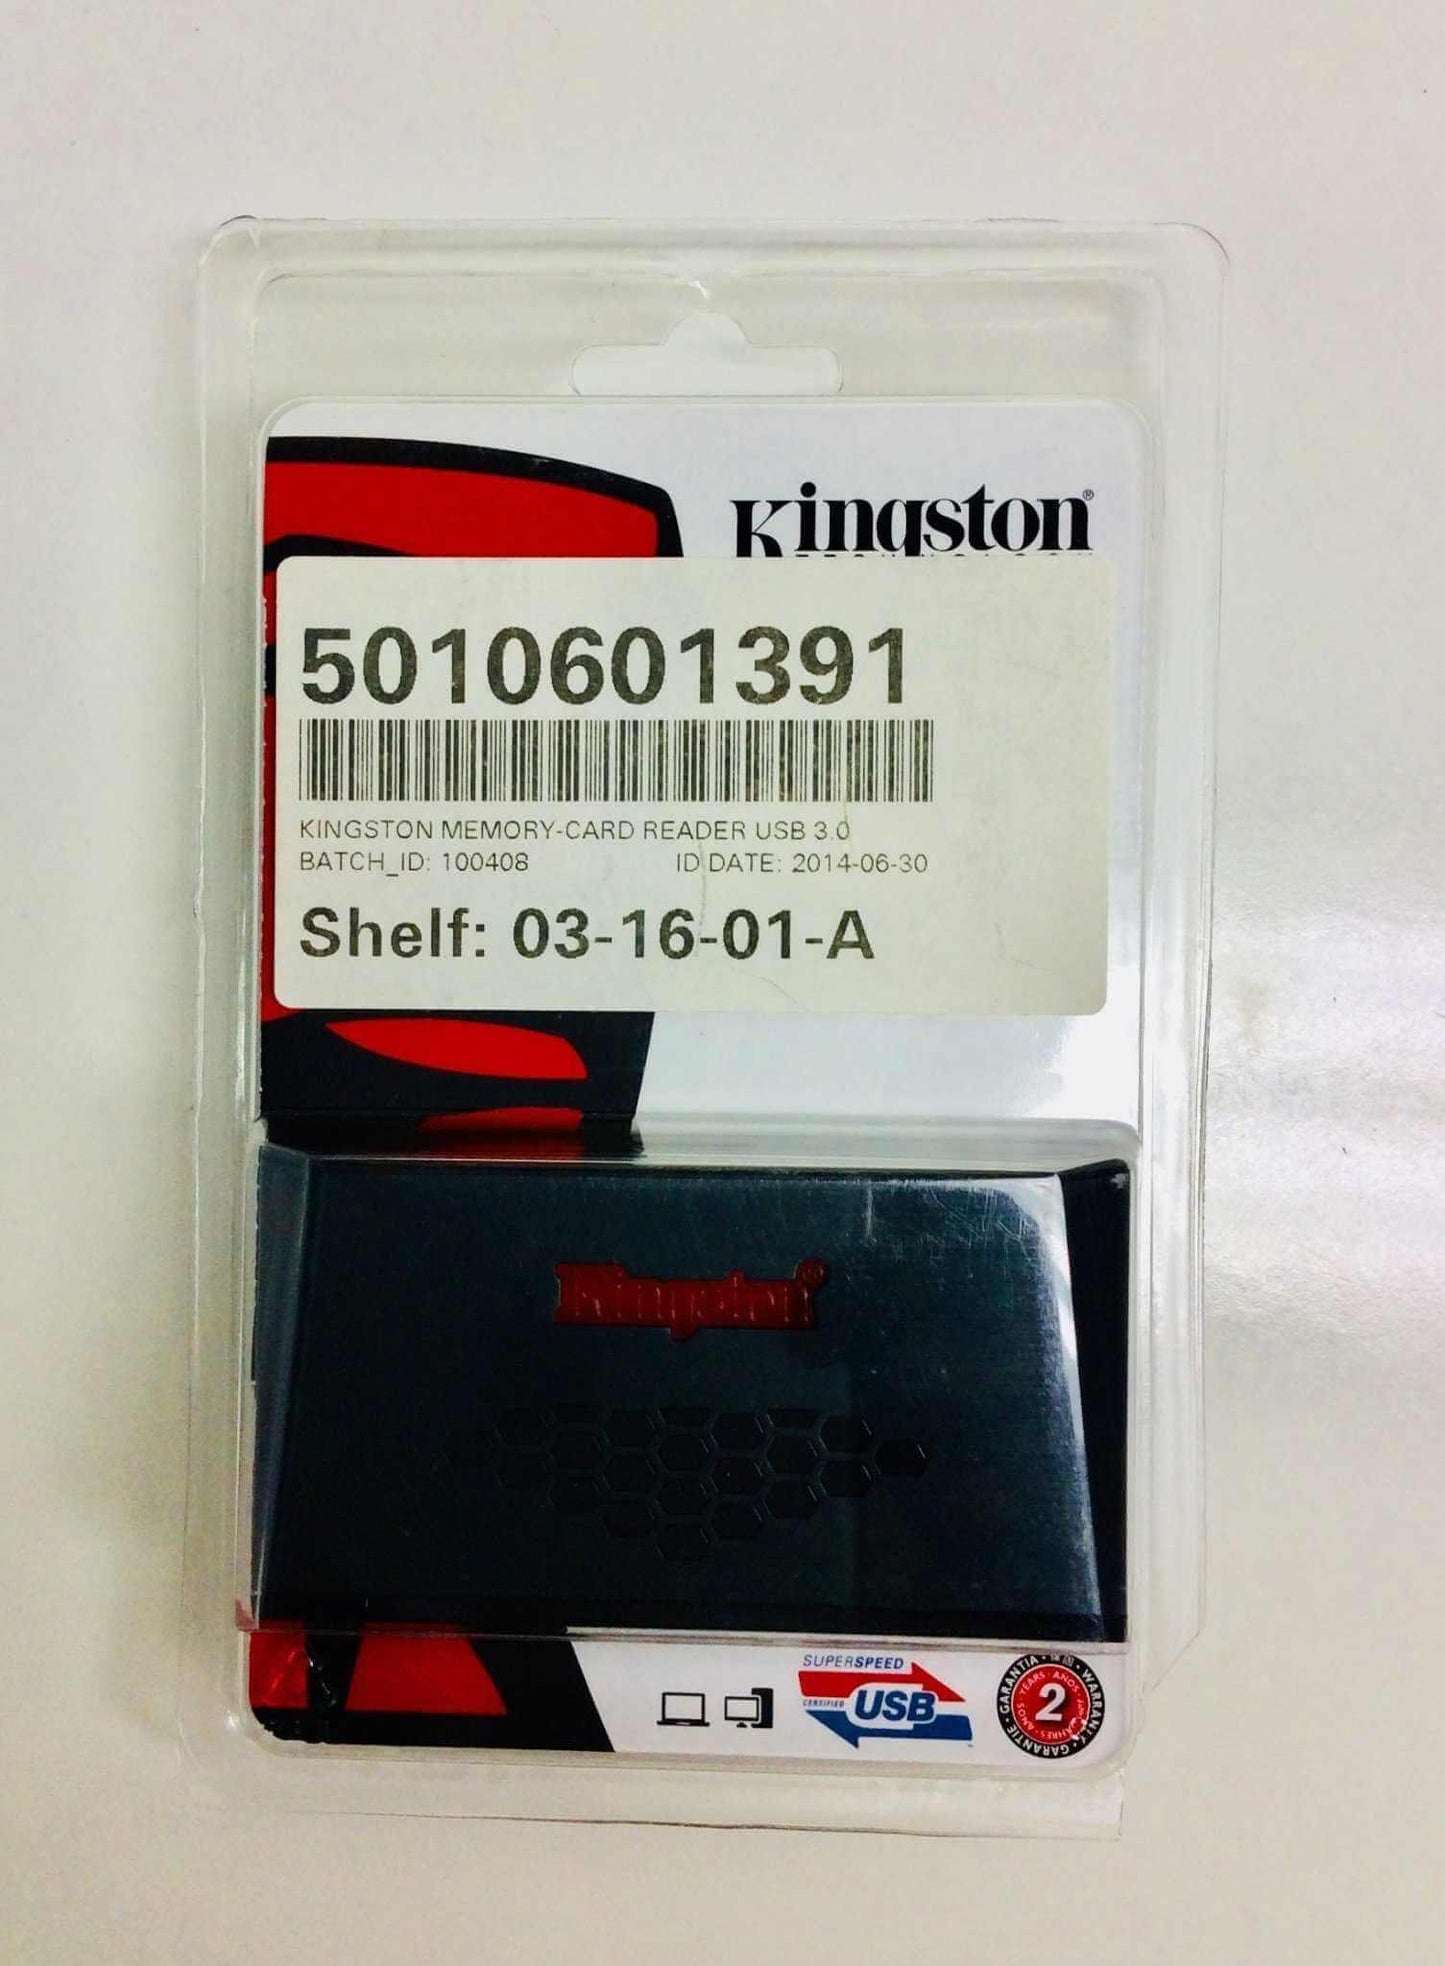 NEW Kingston Breas High-Speed Media CF Memory Card Reader with Warranty FREE Shipping - MBR Medicals